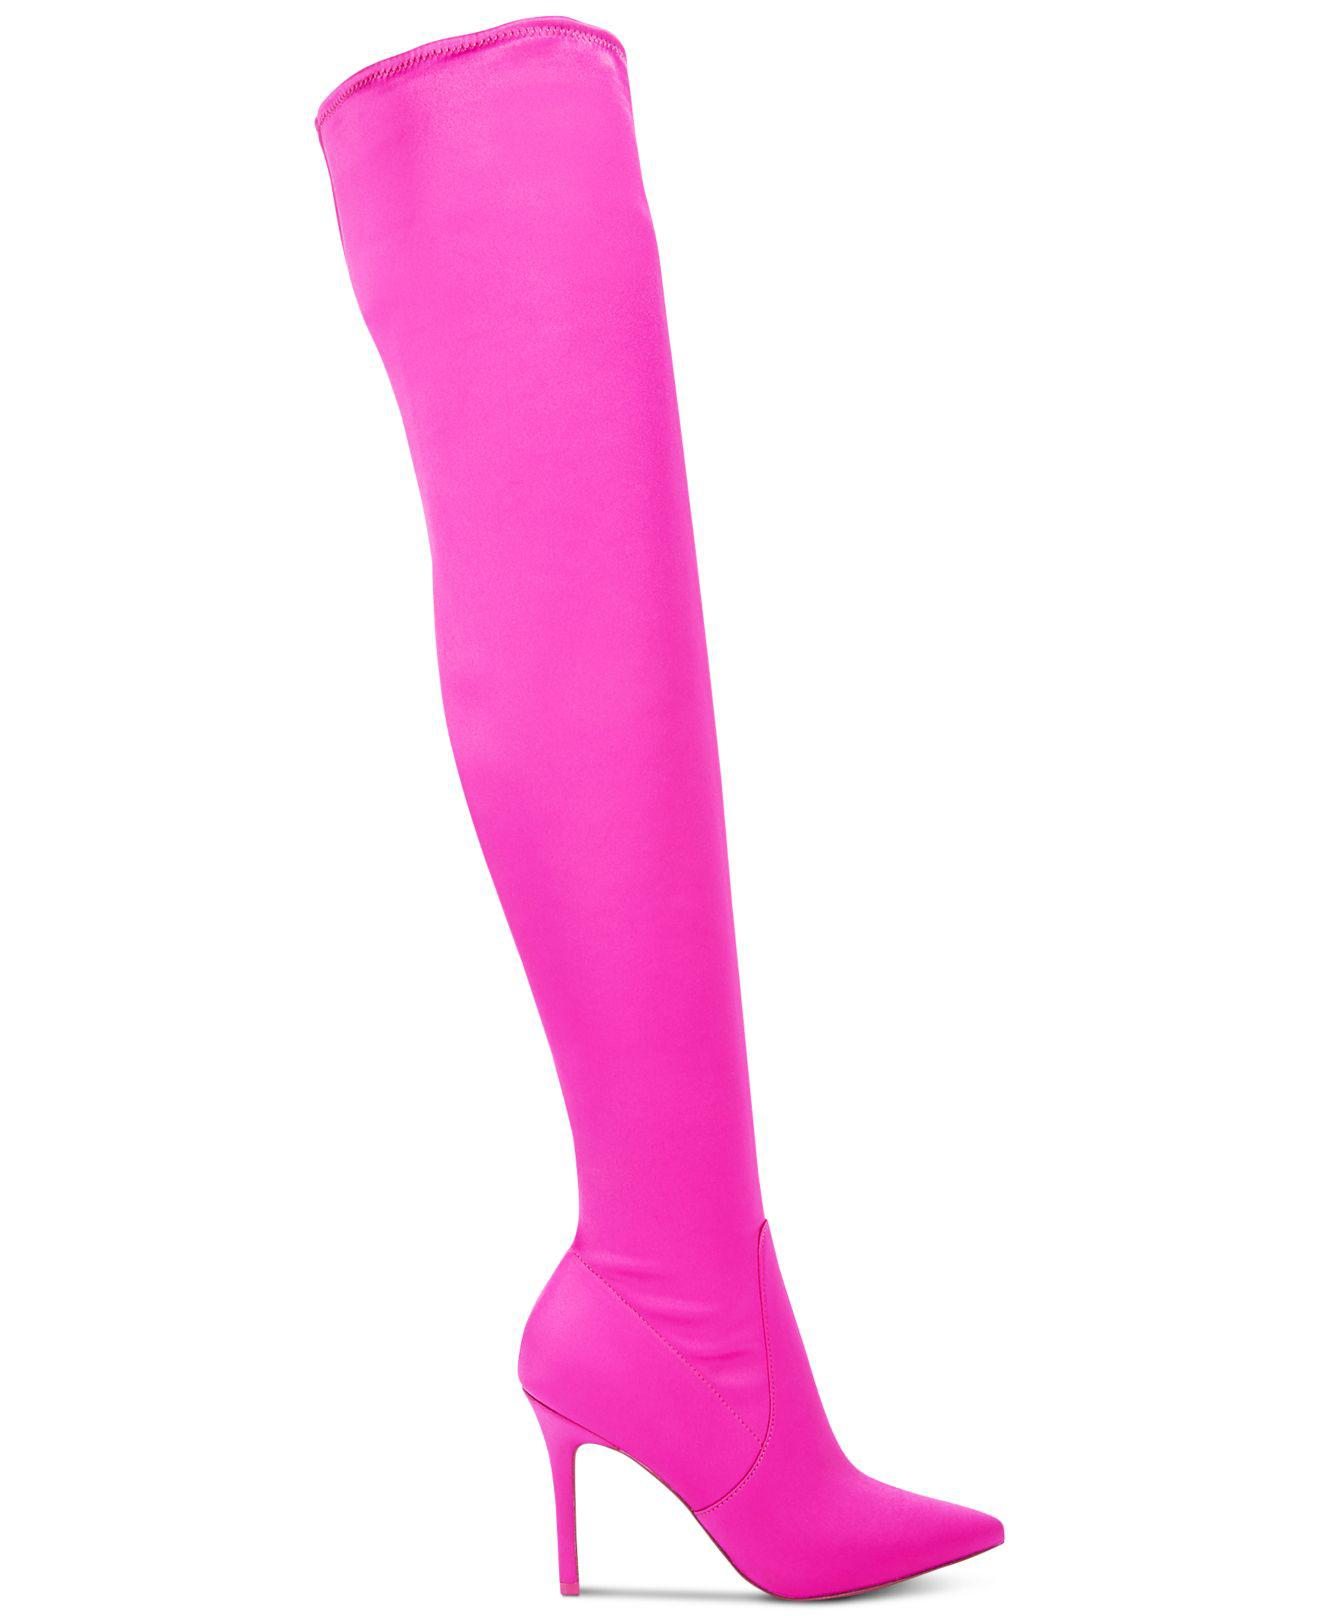 ALDO Sailors Satin Stretch Over-the-knee Dress Boots in Pink | Lyst